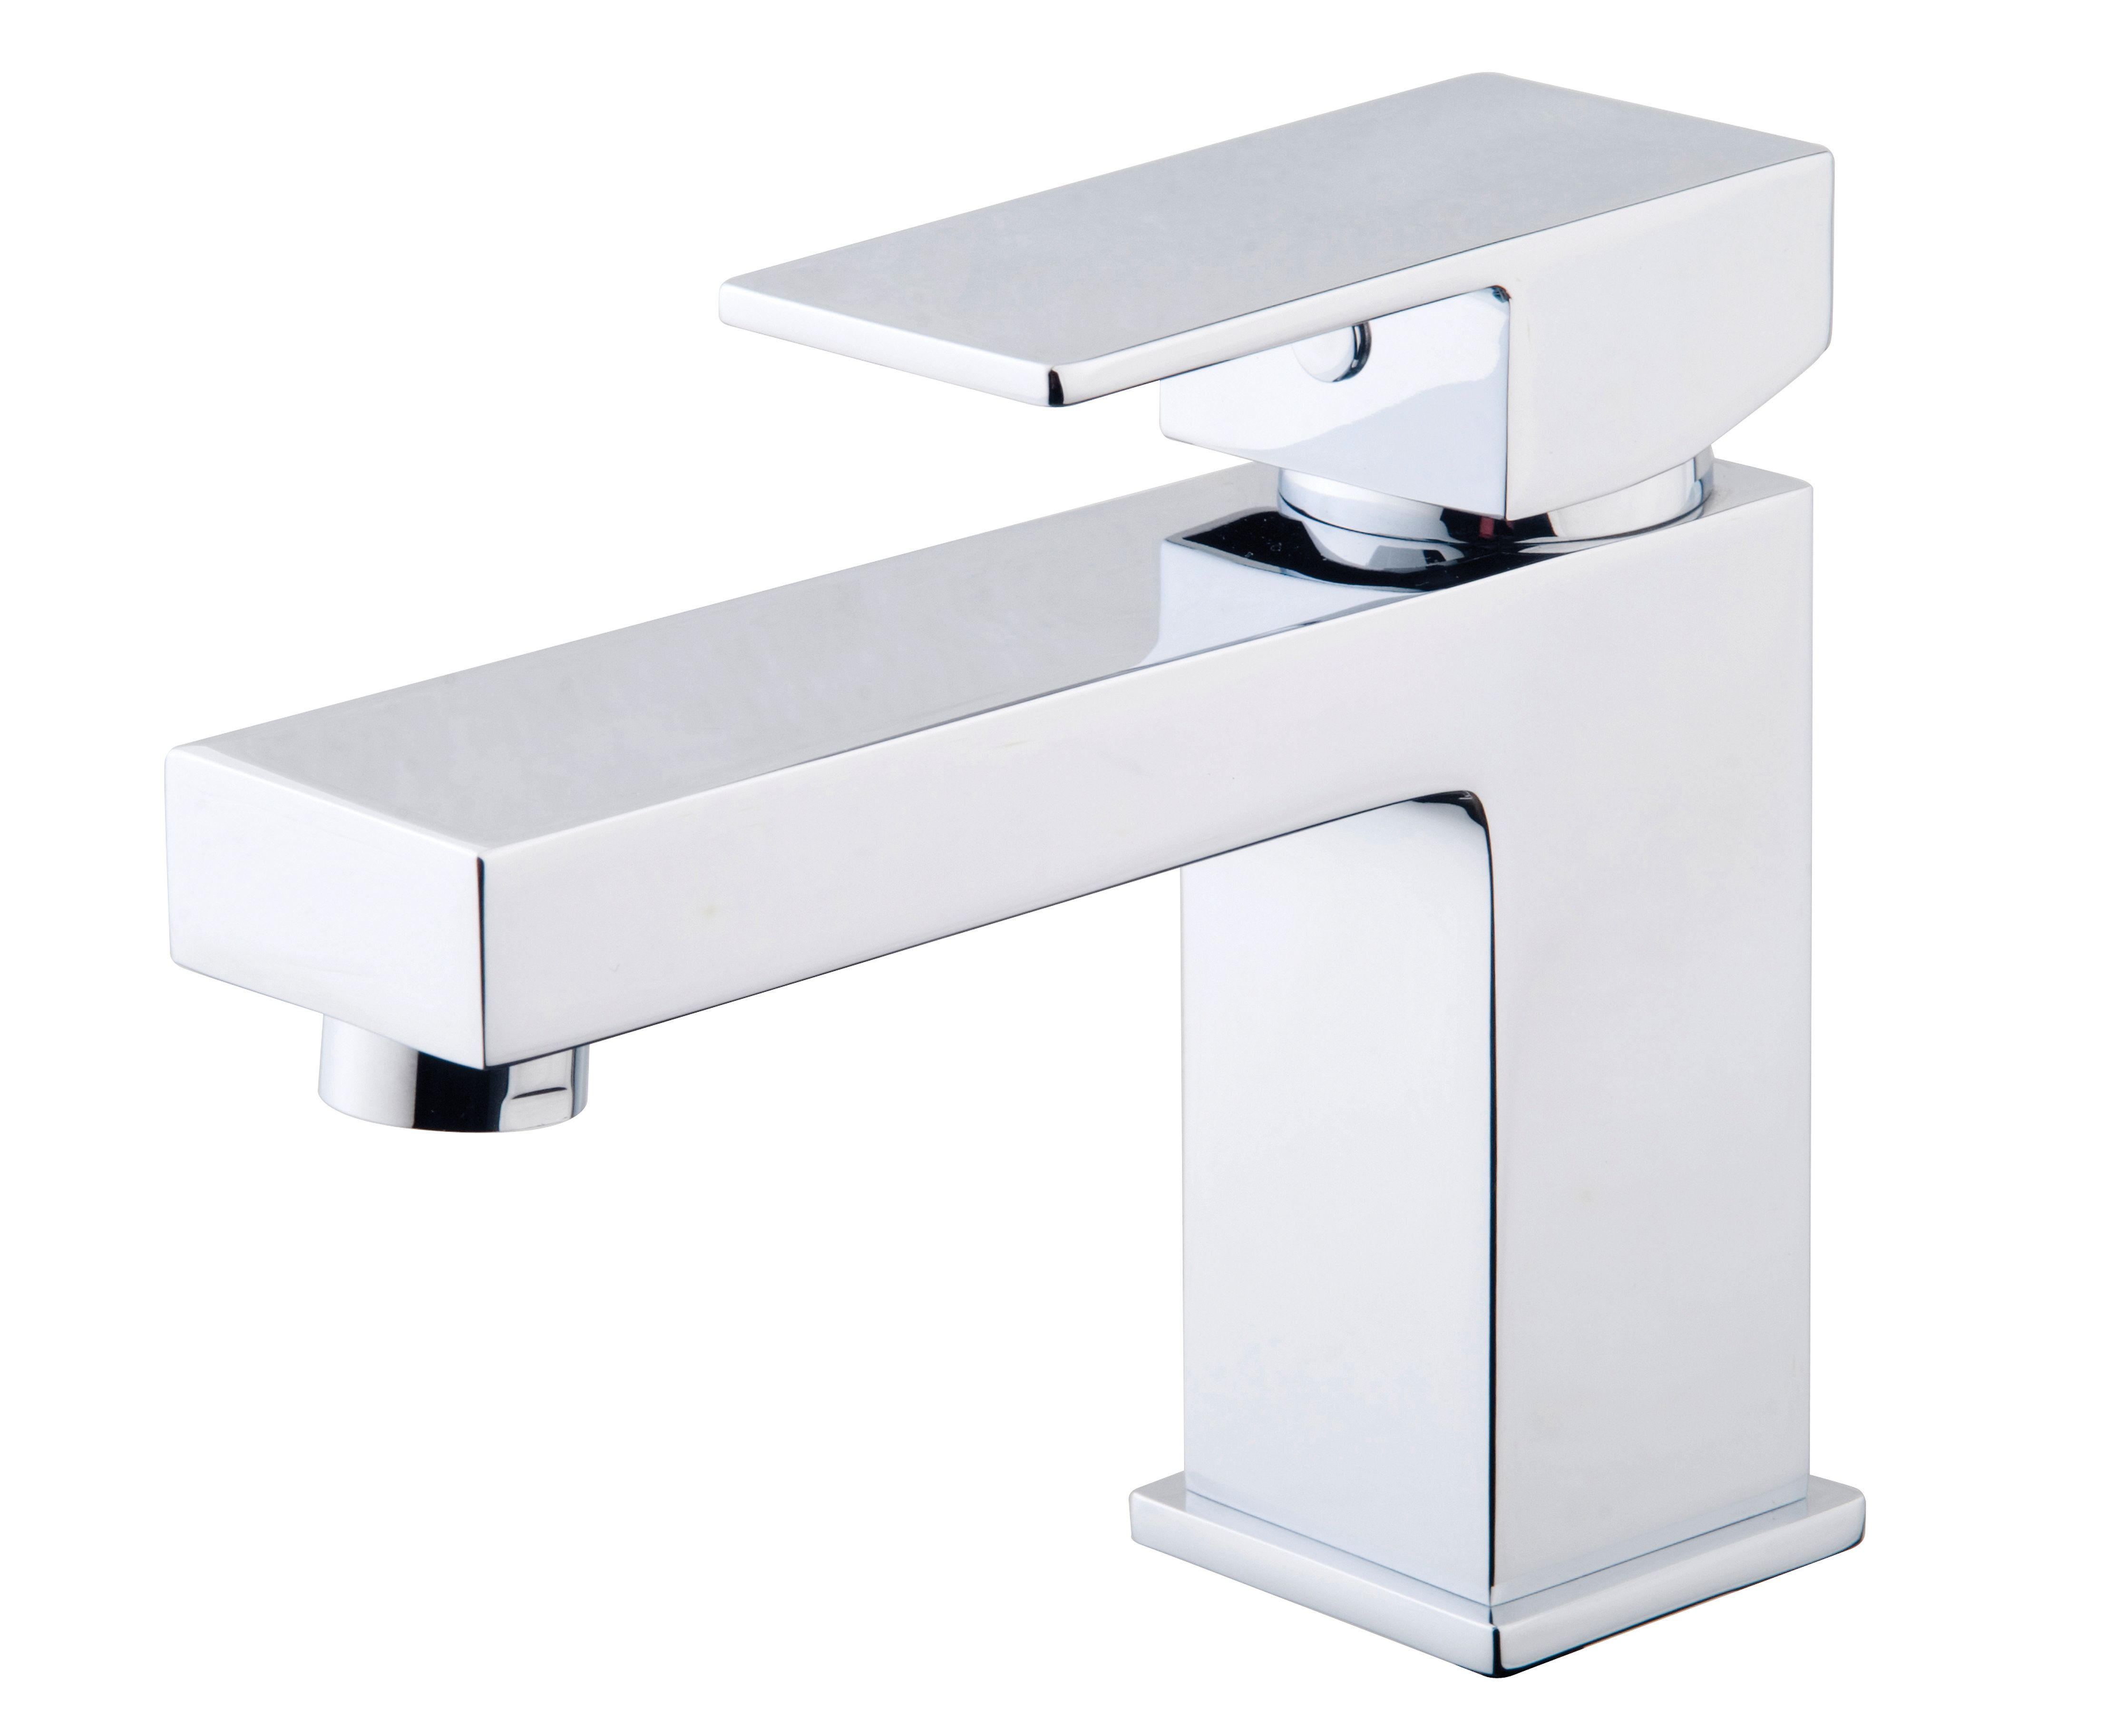 Image of Wickes Kubic Chrome Basin Mixer Tap